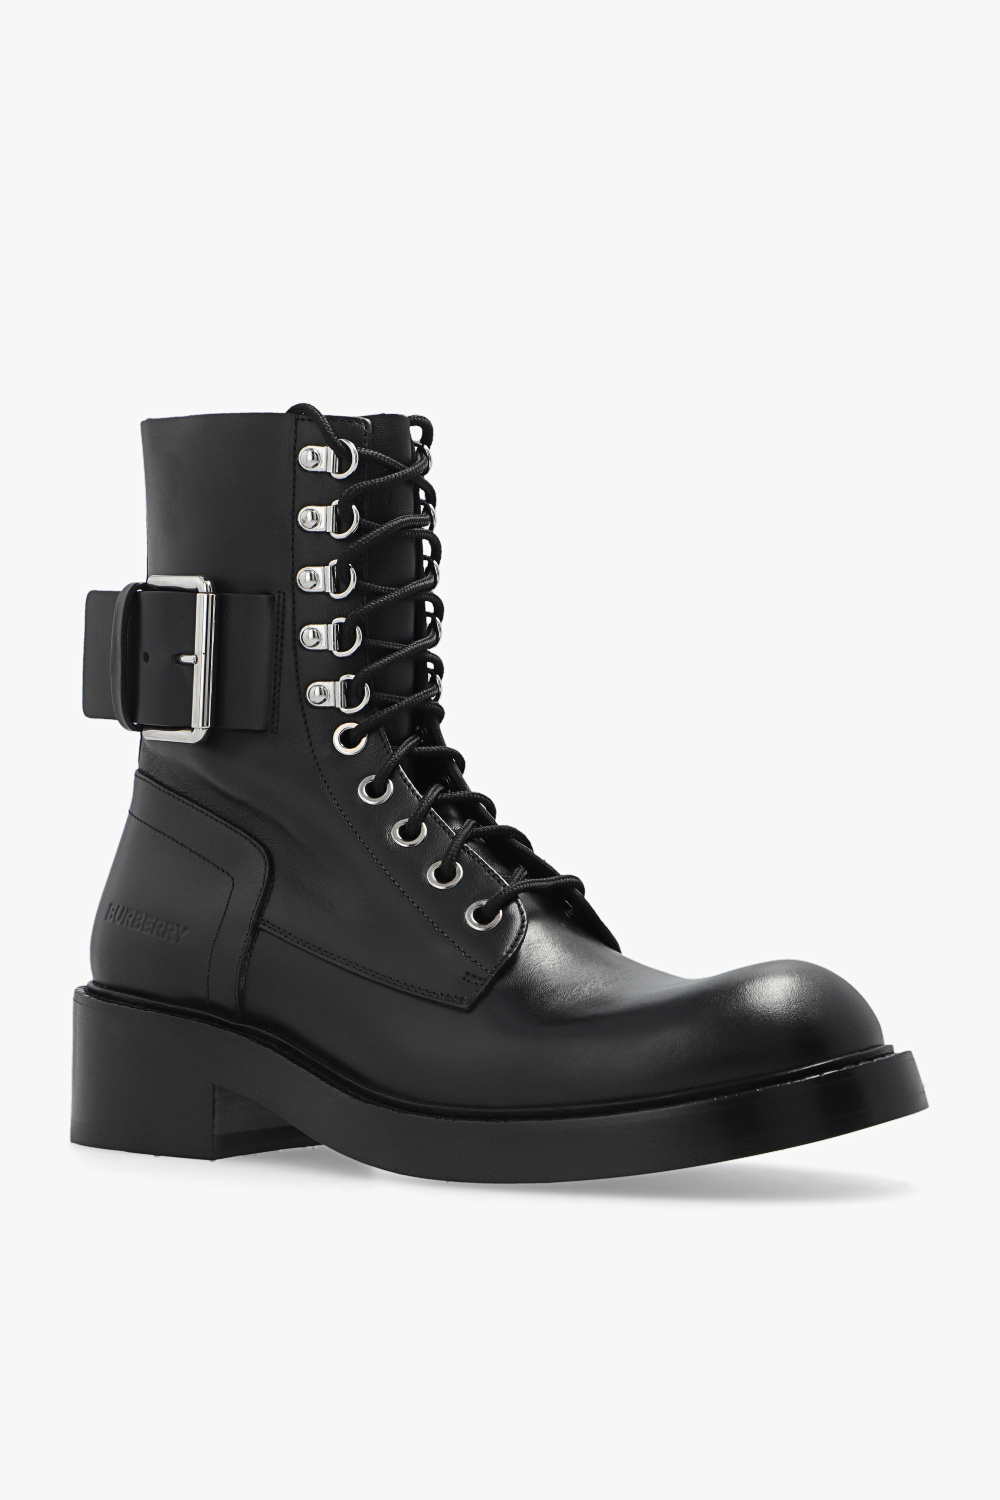 Burberry Leather ankle boots